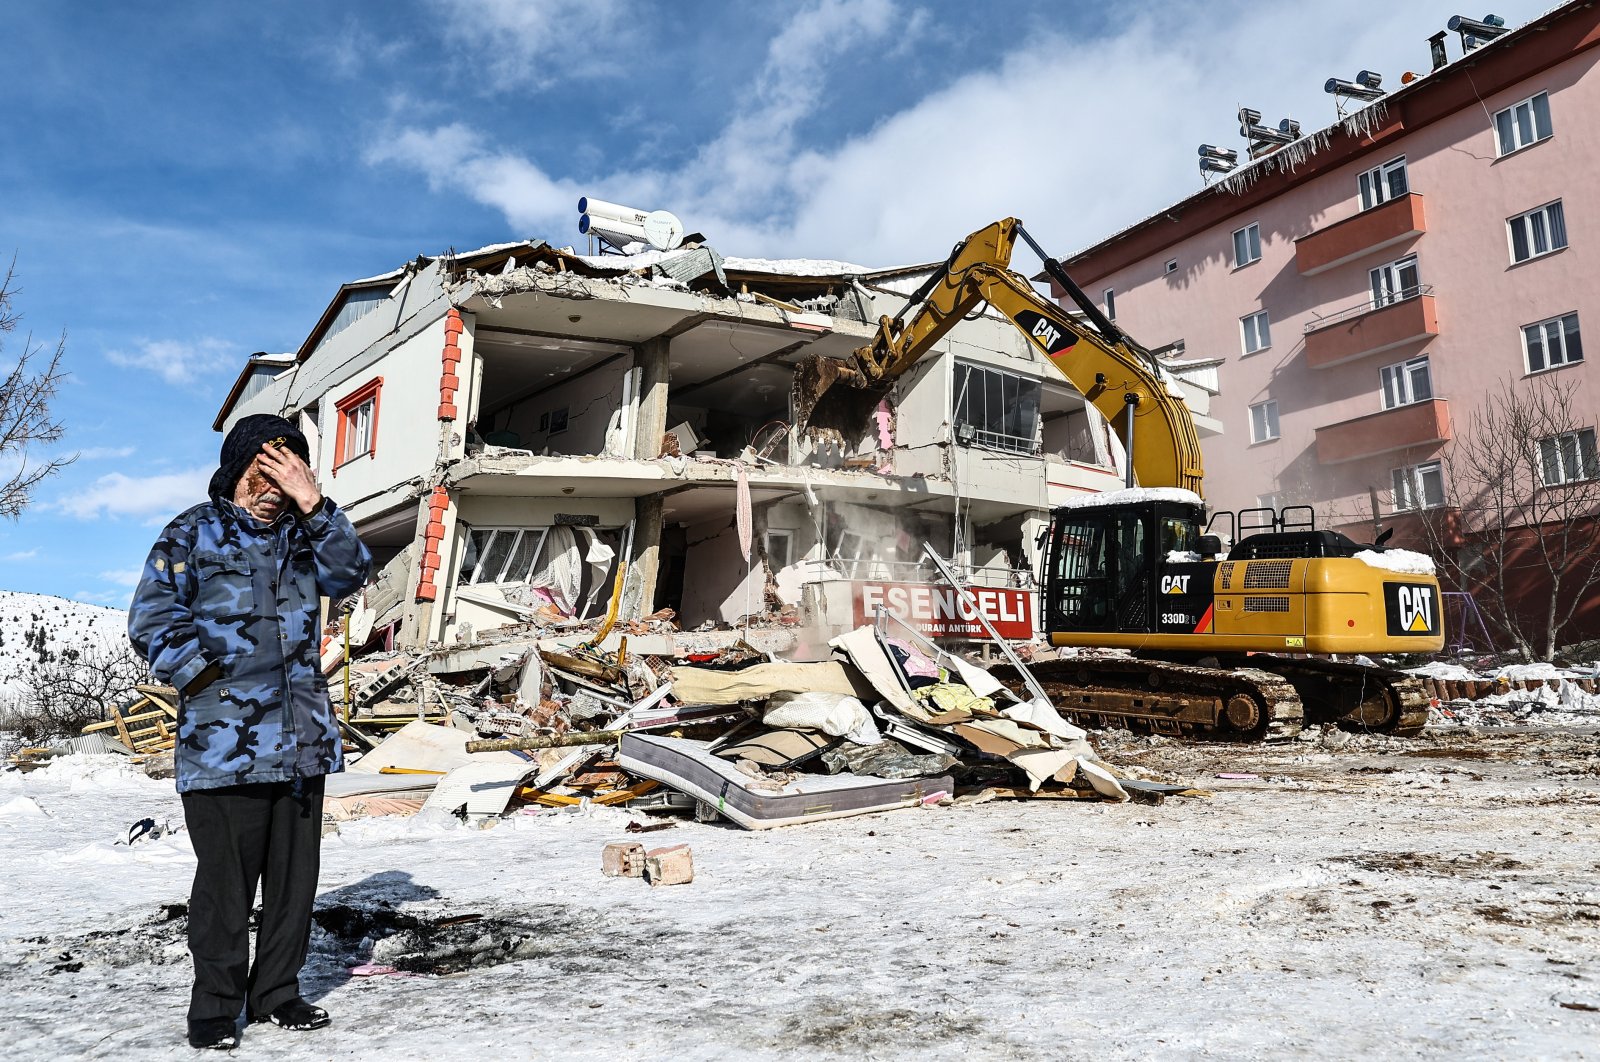 A woman reacts next to a collapsed building during search operations in the aftermath of a powerful earthquake in the Elbistan district of Kahramanmaraş, southeastern Türkiye, Feb. 7, 2023. (EPA Photo)